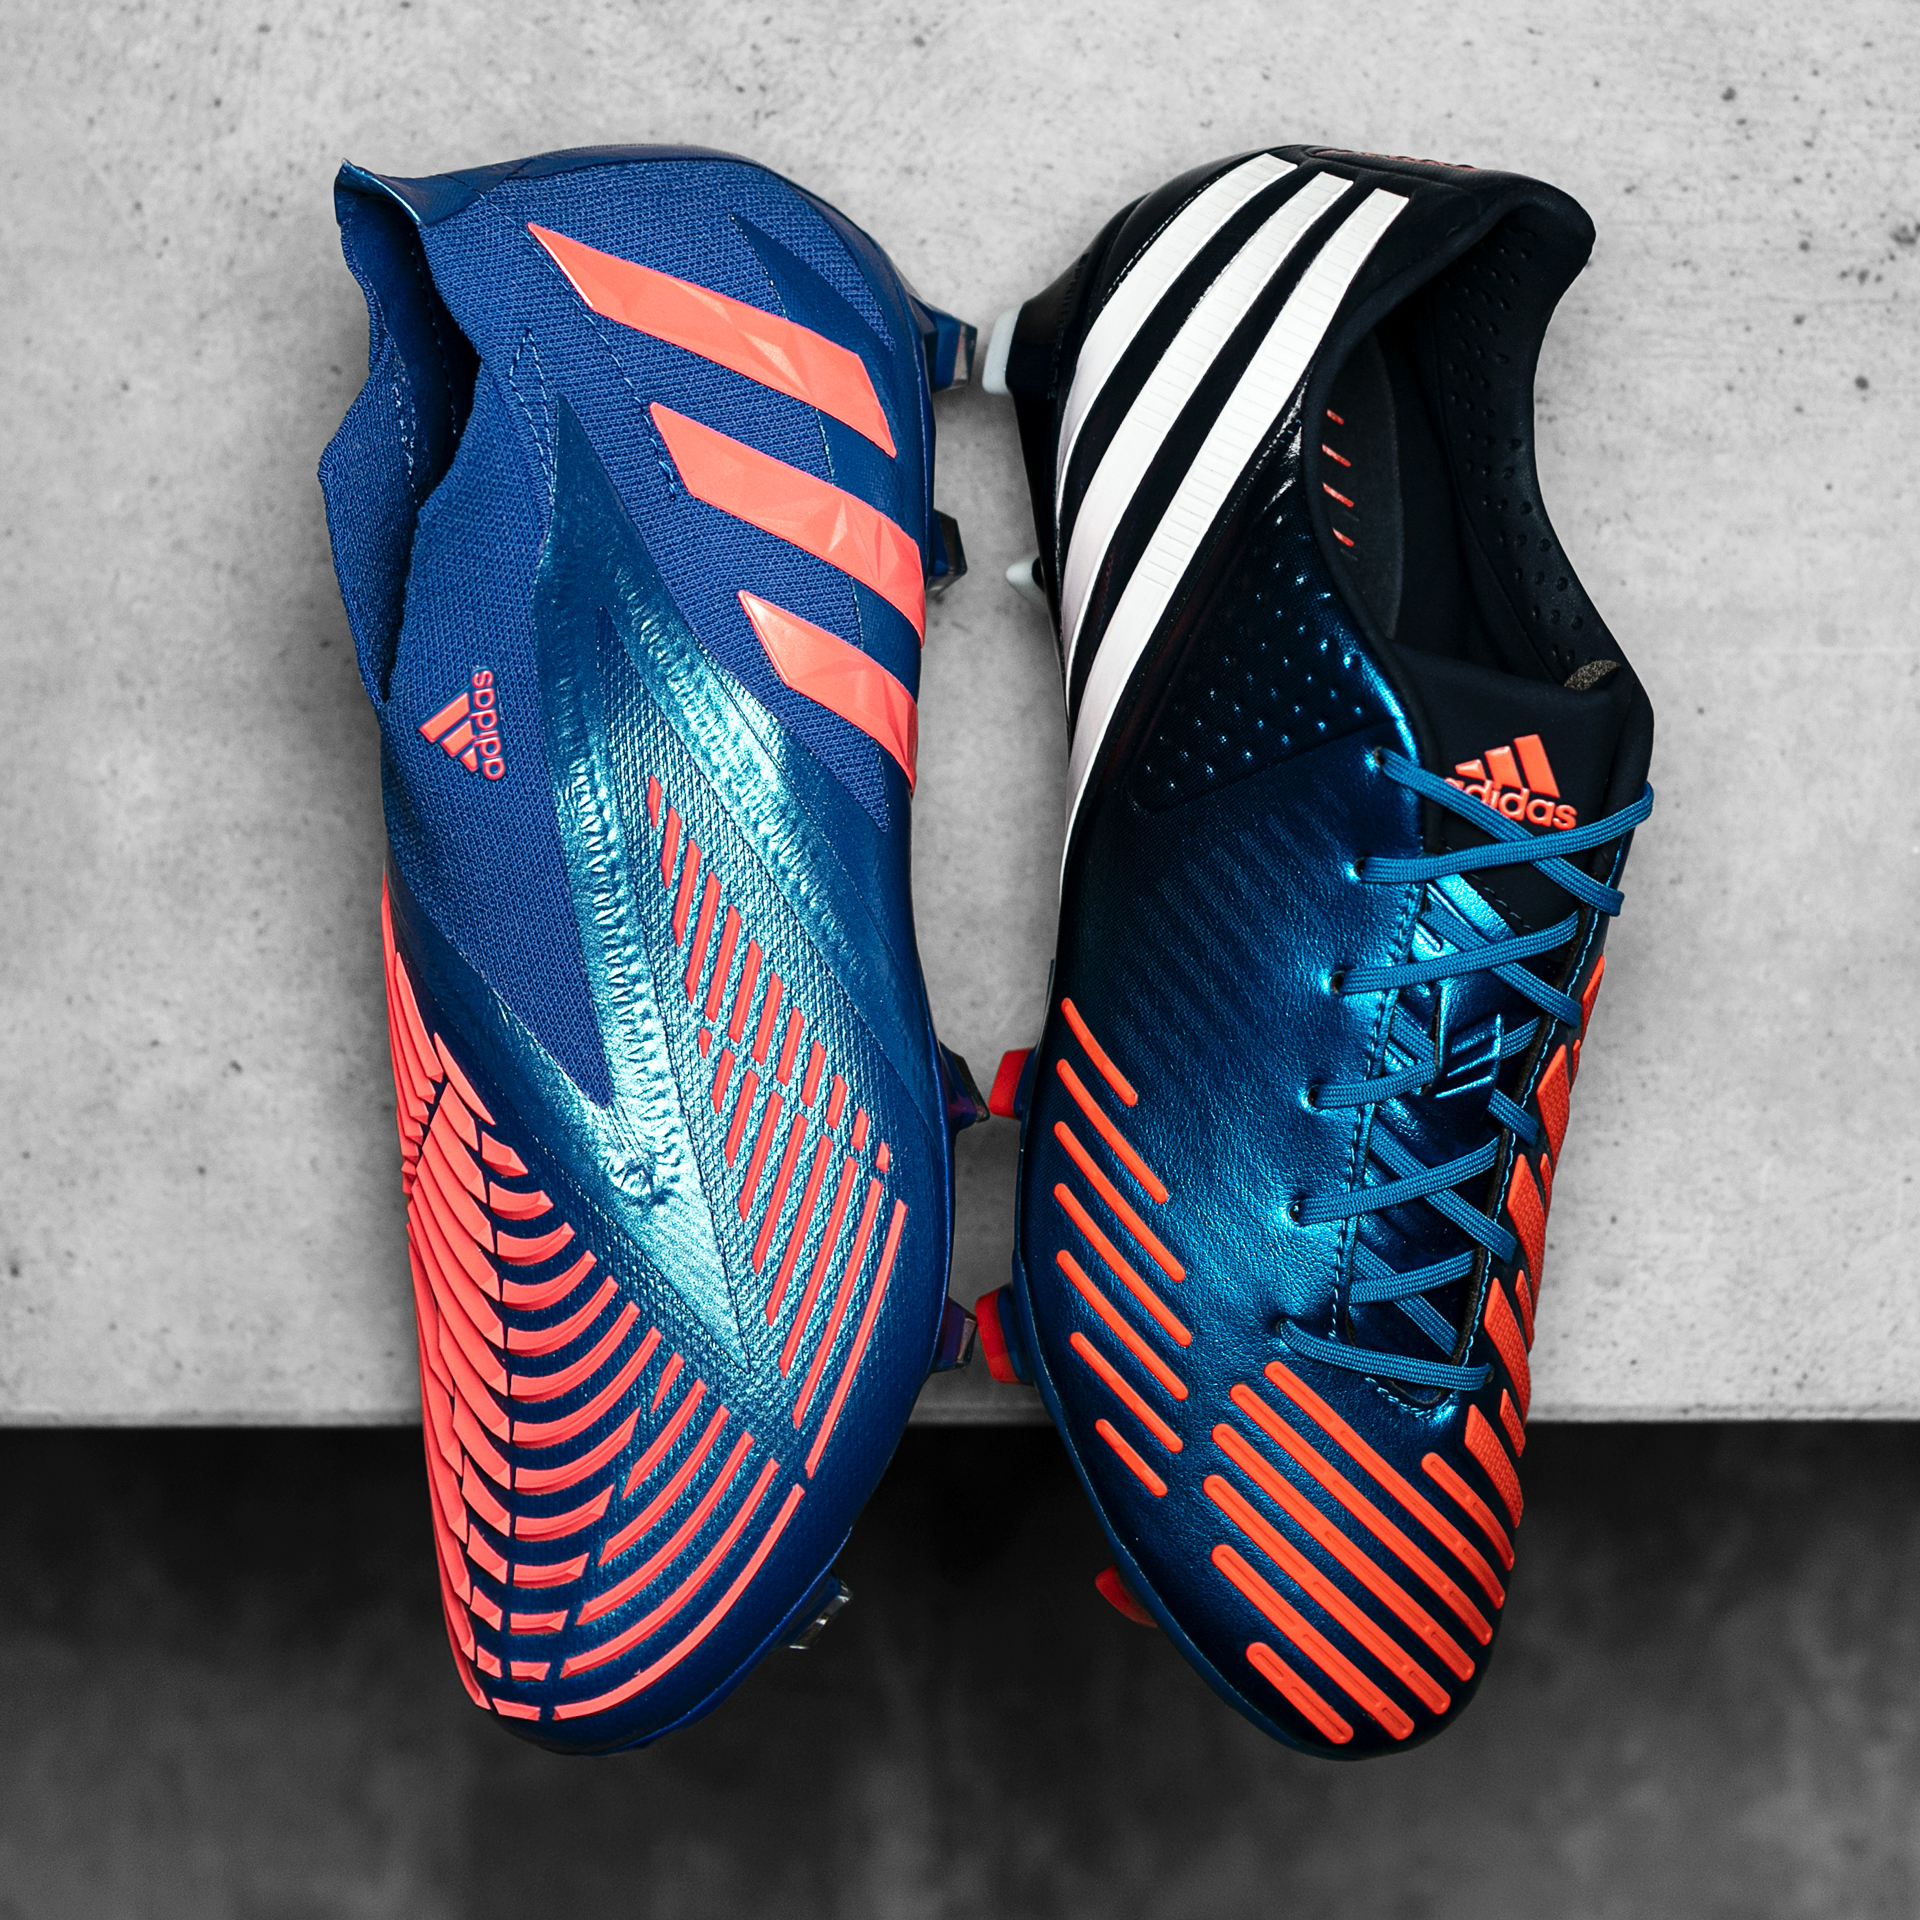 unisportlife on "When we the new Predator Edge, we instantly got flashback to the launch version of the old Predator LZ, dropped almost 10 years ago 🔴🔵 Does